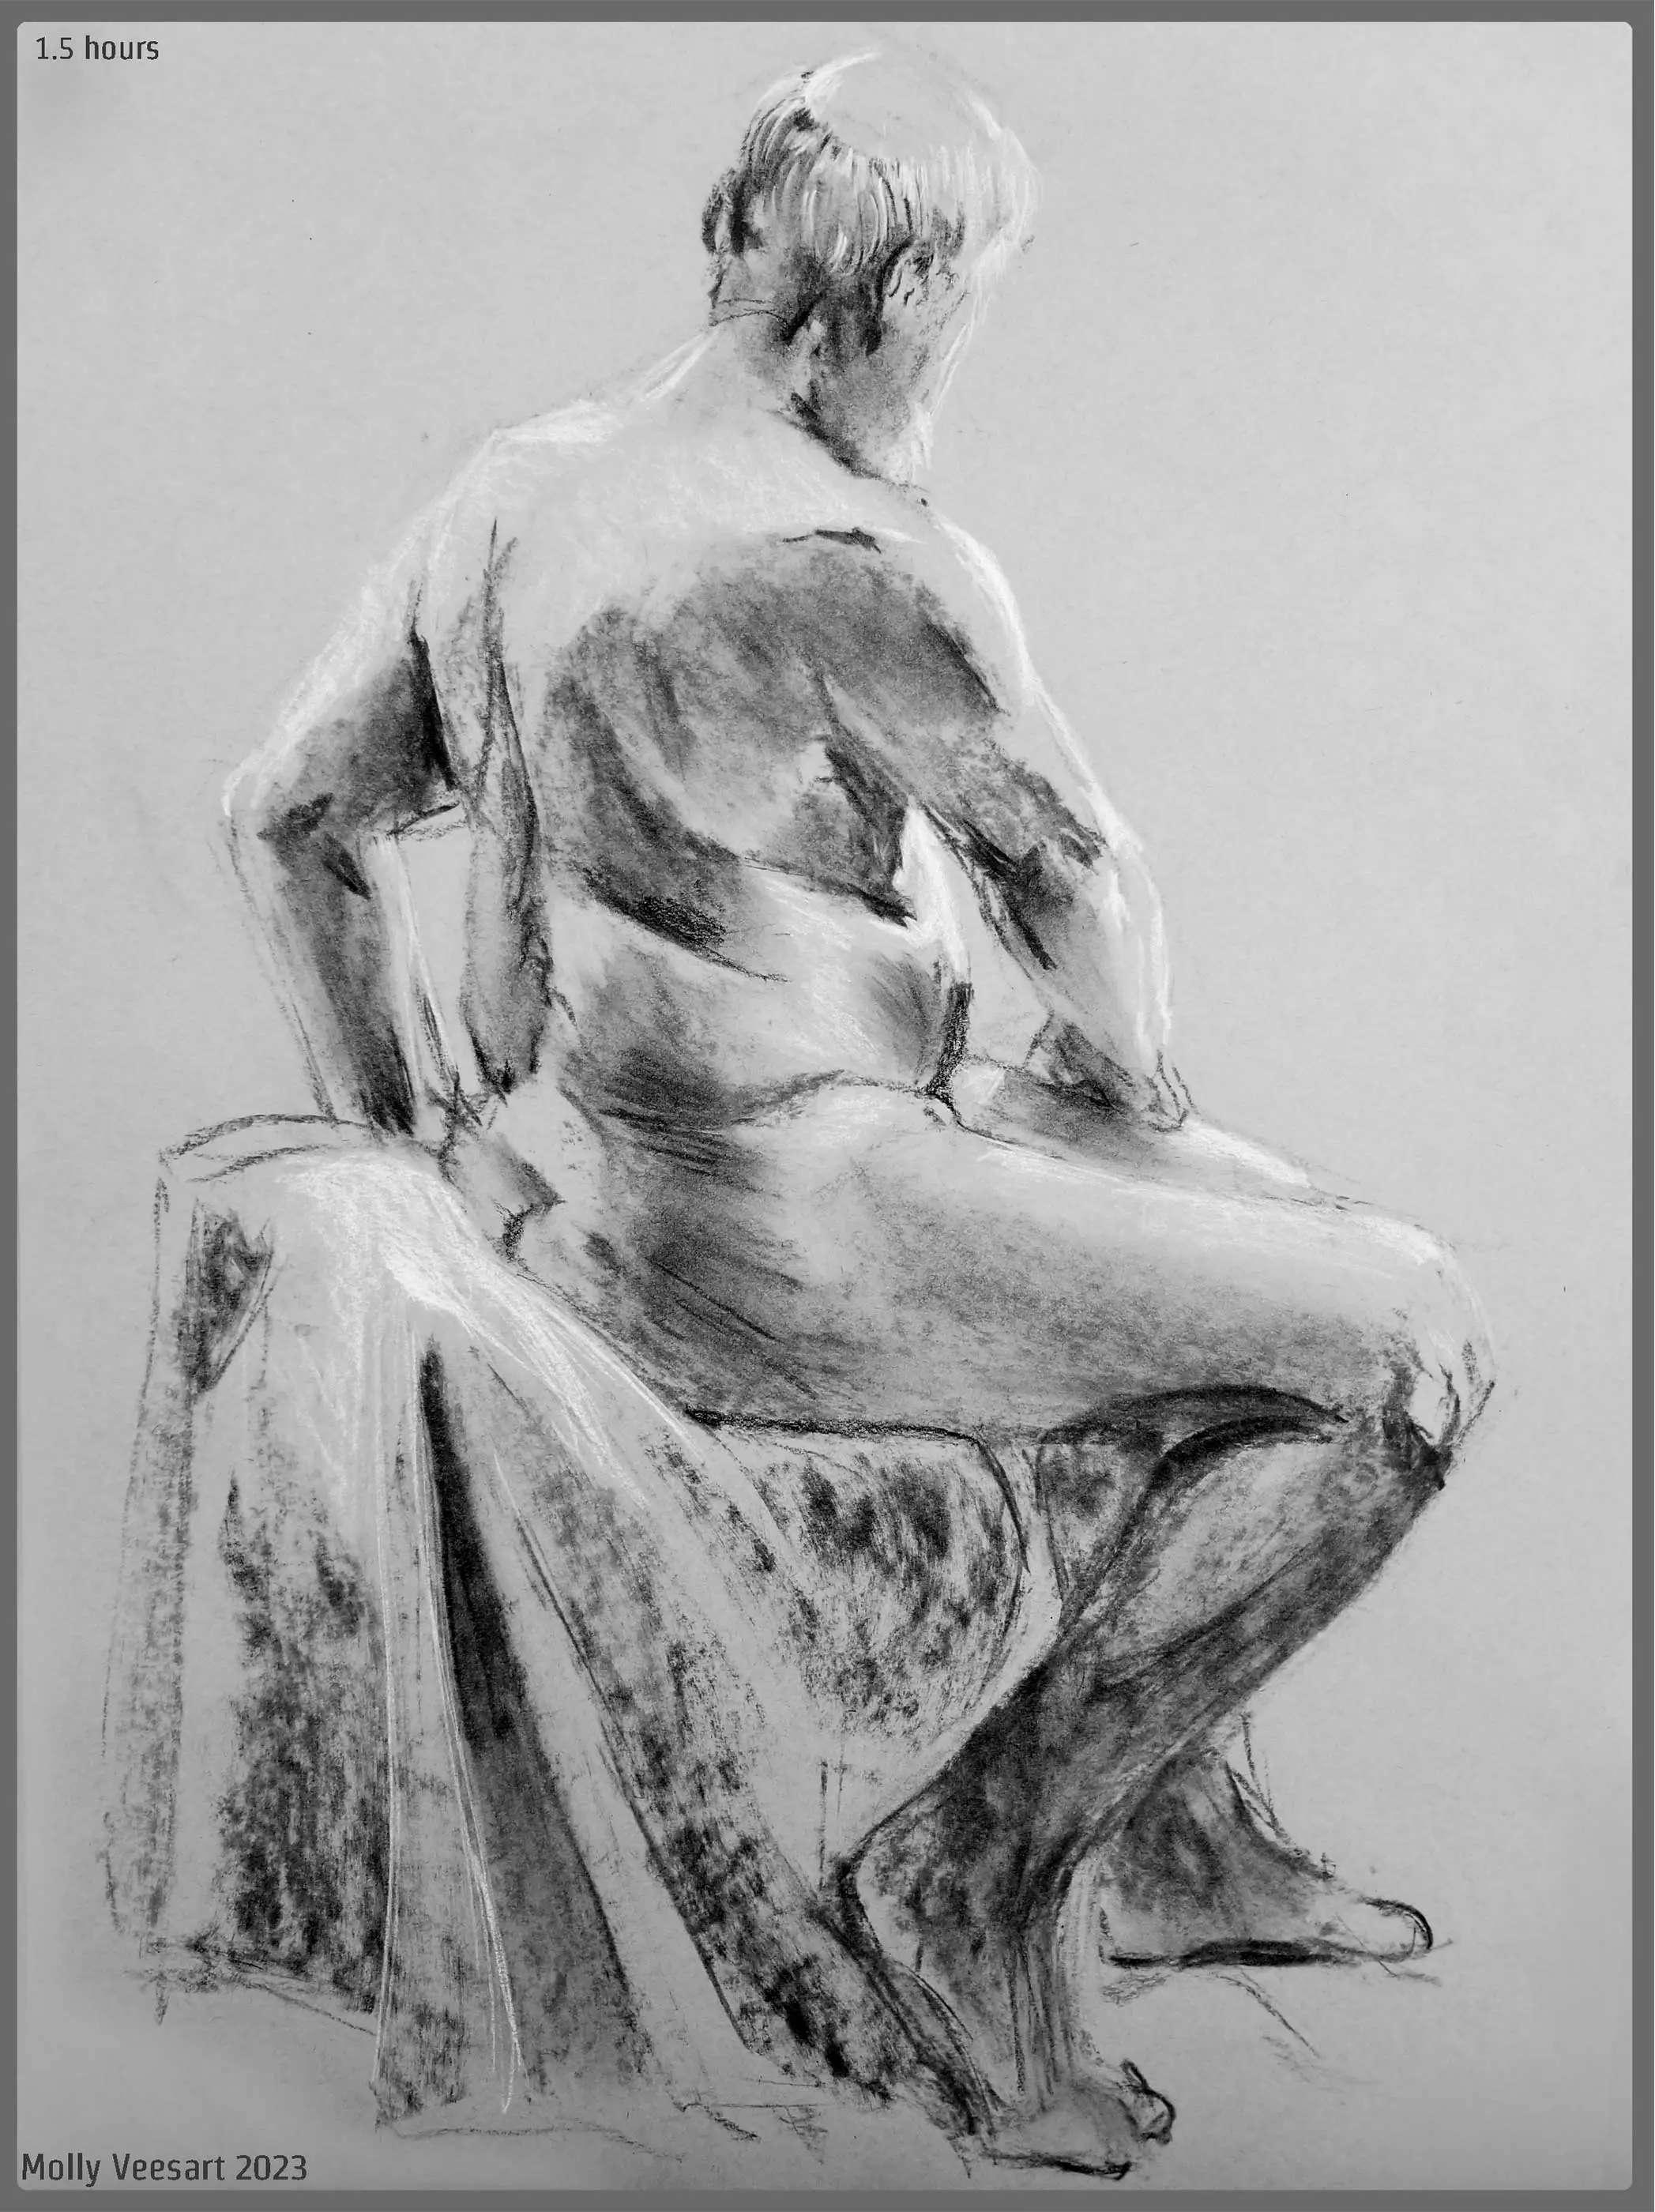 A sketch of a person sitting on a chair with cloth draped over it.